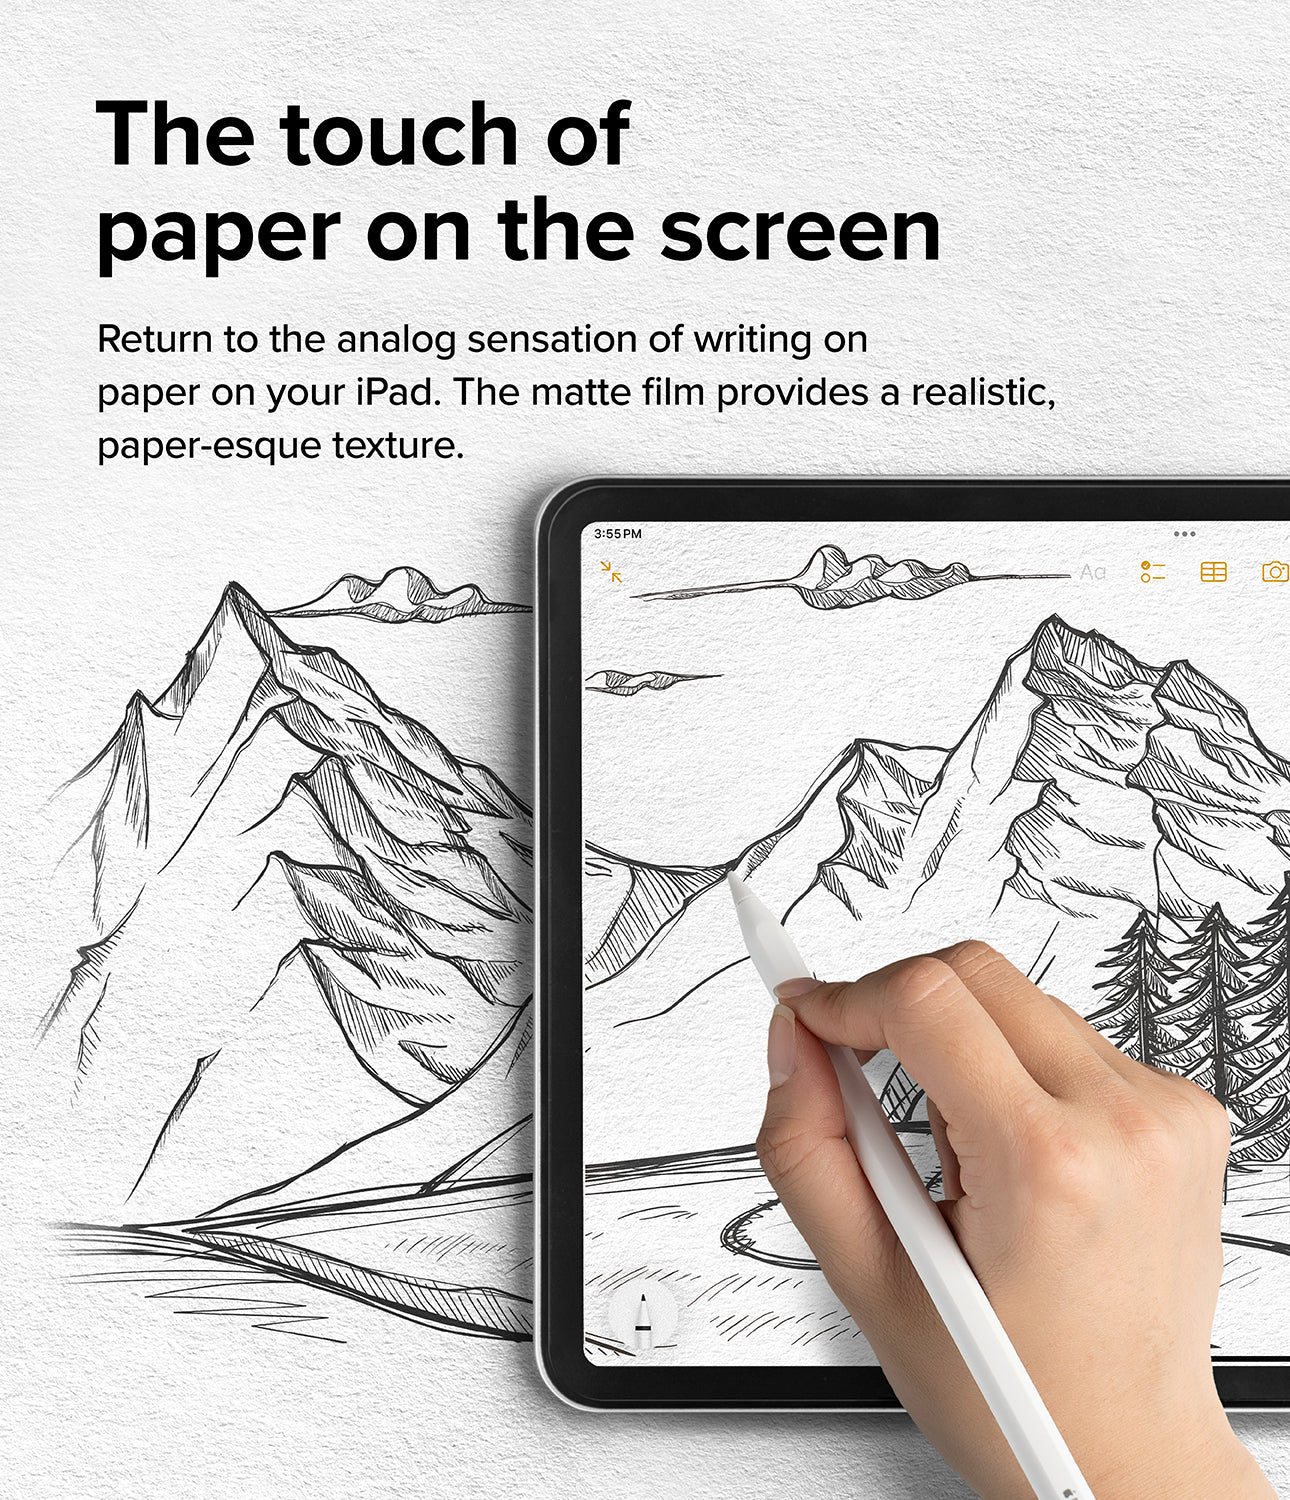 iPad Pro 11" (M4) Screen Protector | Paper Touch Film - Soft - The touch of paper on the screen. Return to the analog sensation of writing on paper on your iPad. The matte film provides a realistic, paper-esque texture.